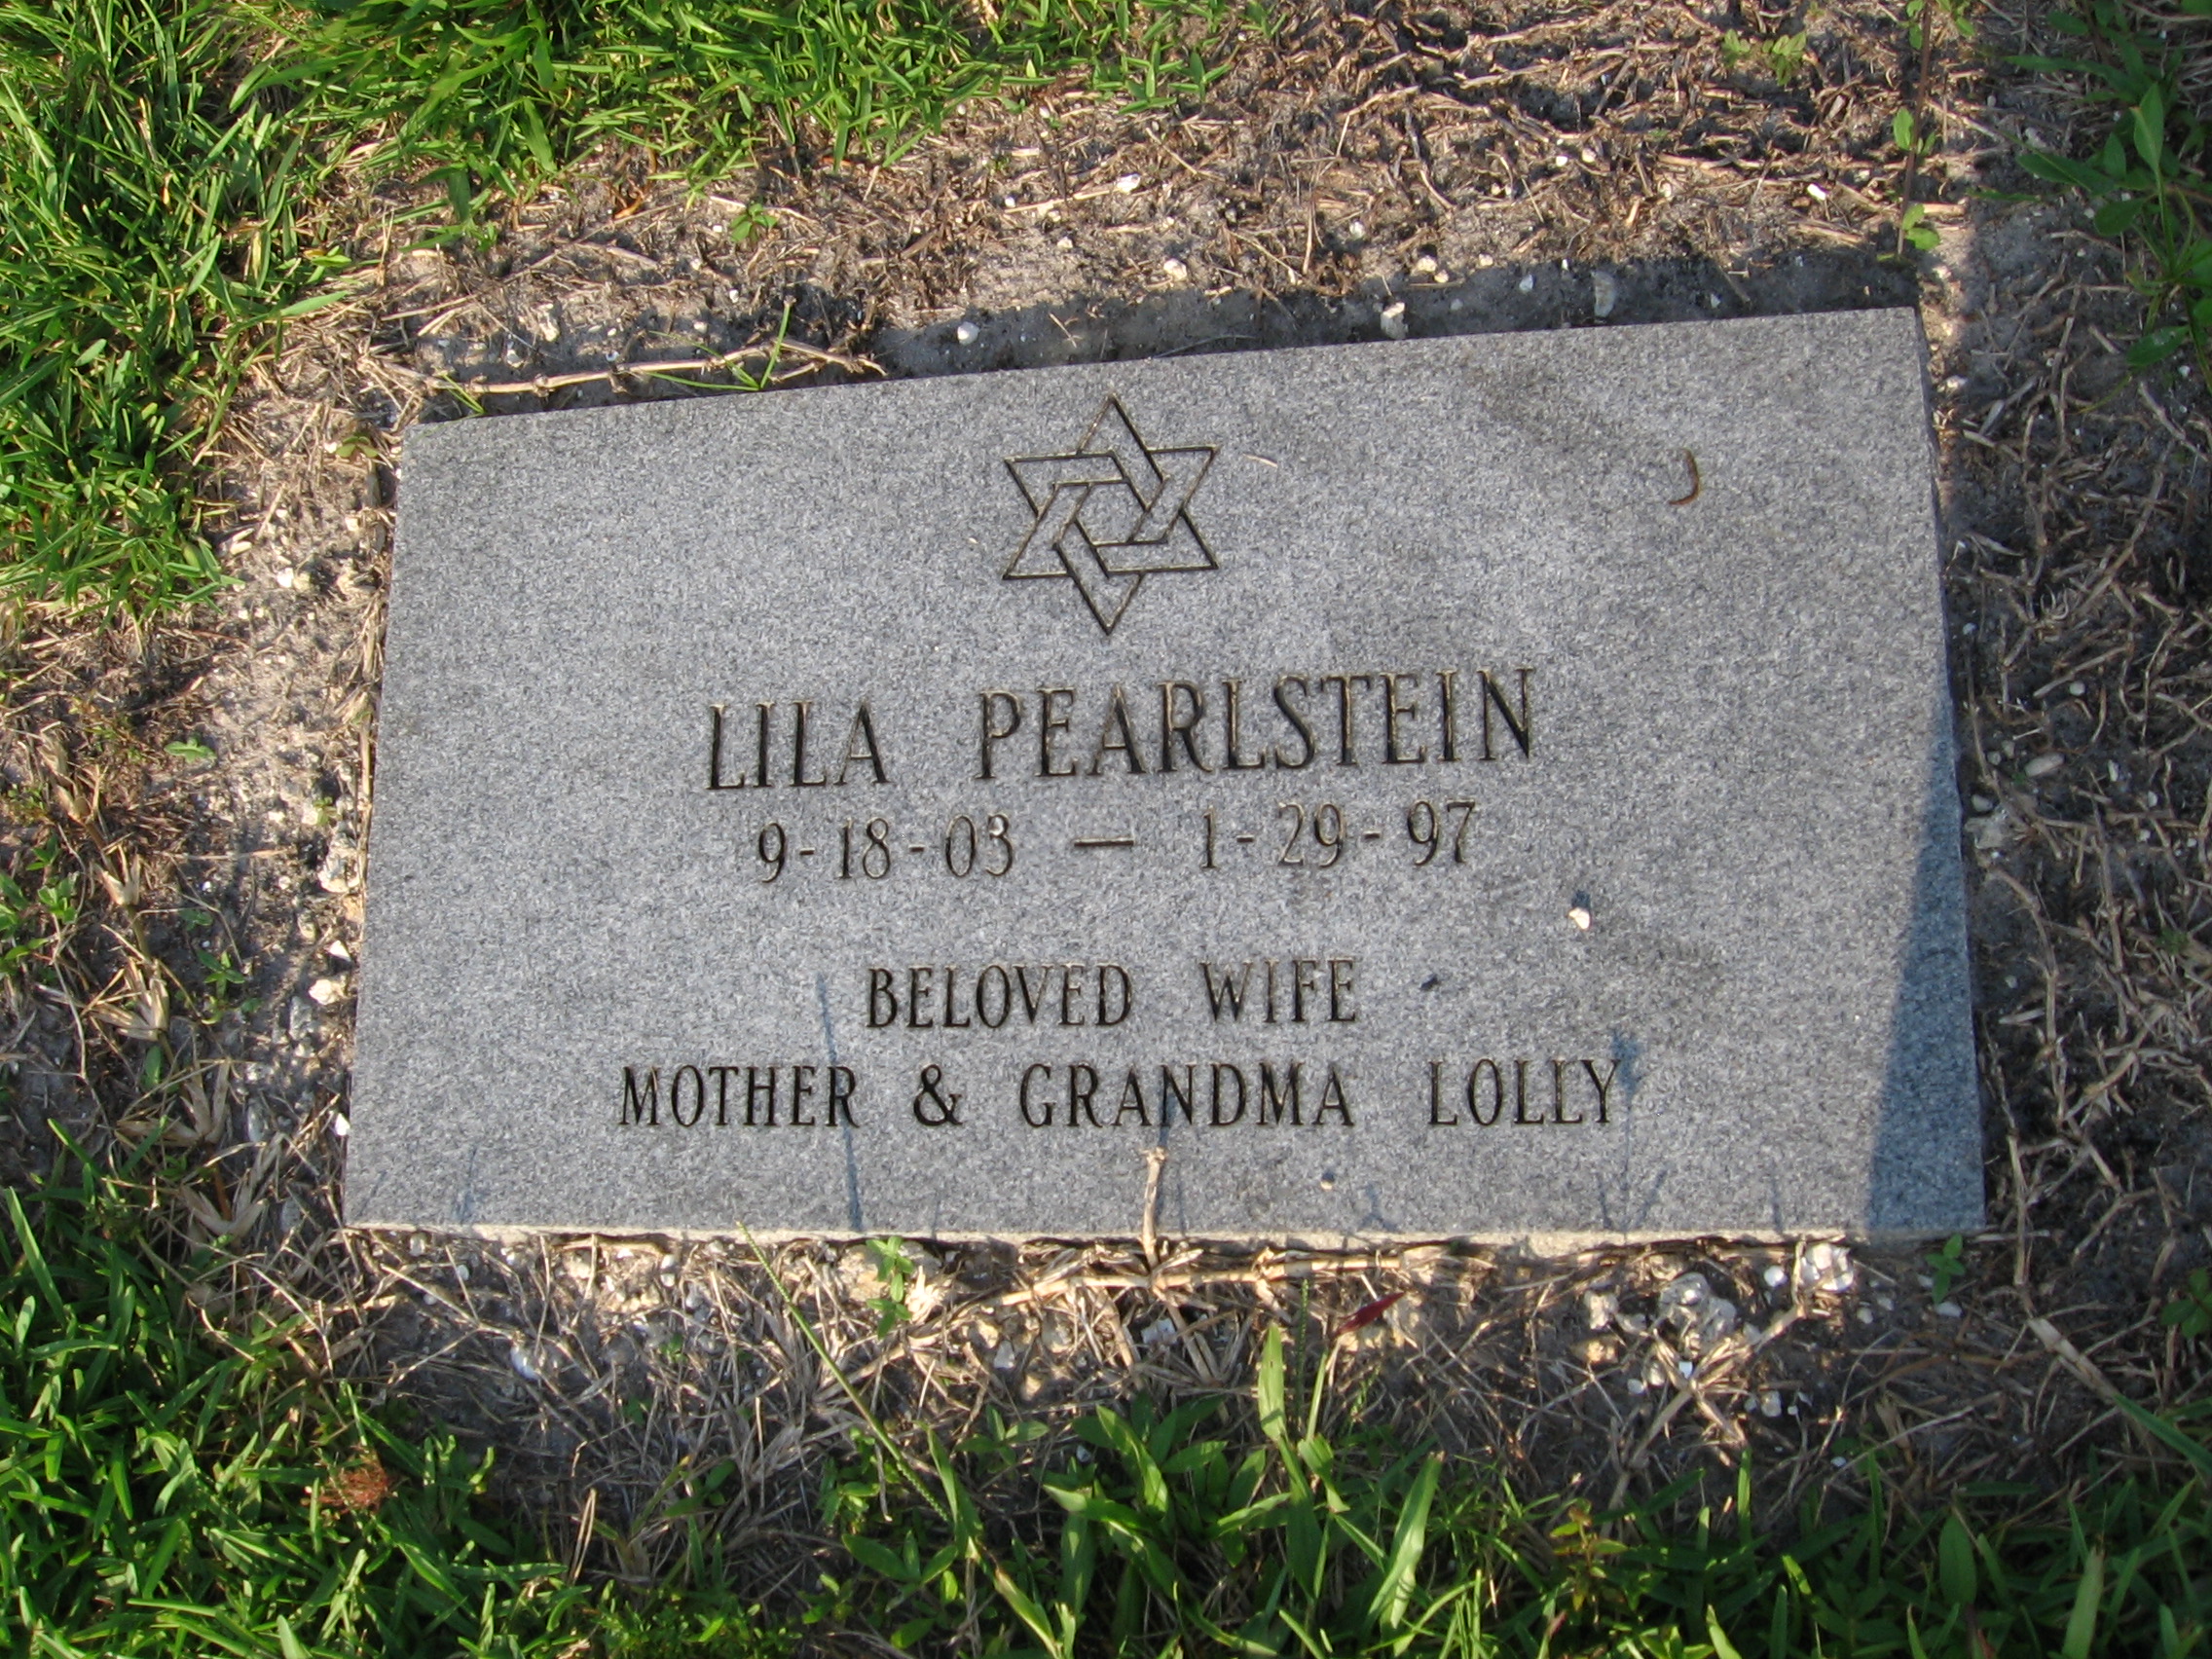 Lila Pearlstein